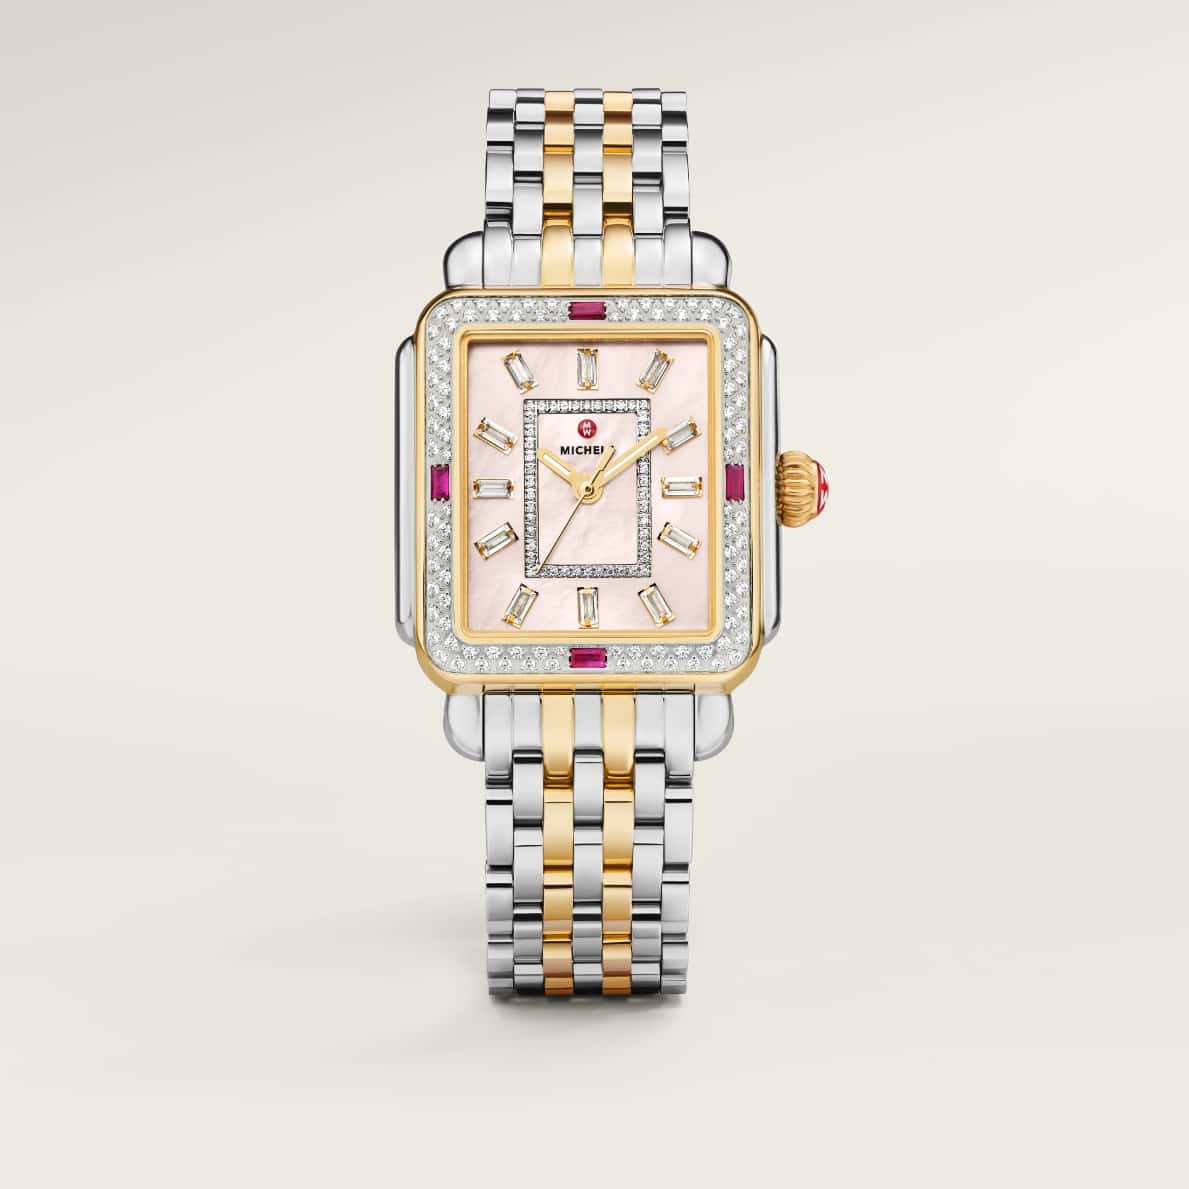 MICHELE Deco Charmante Watch with rubies and baguettes